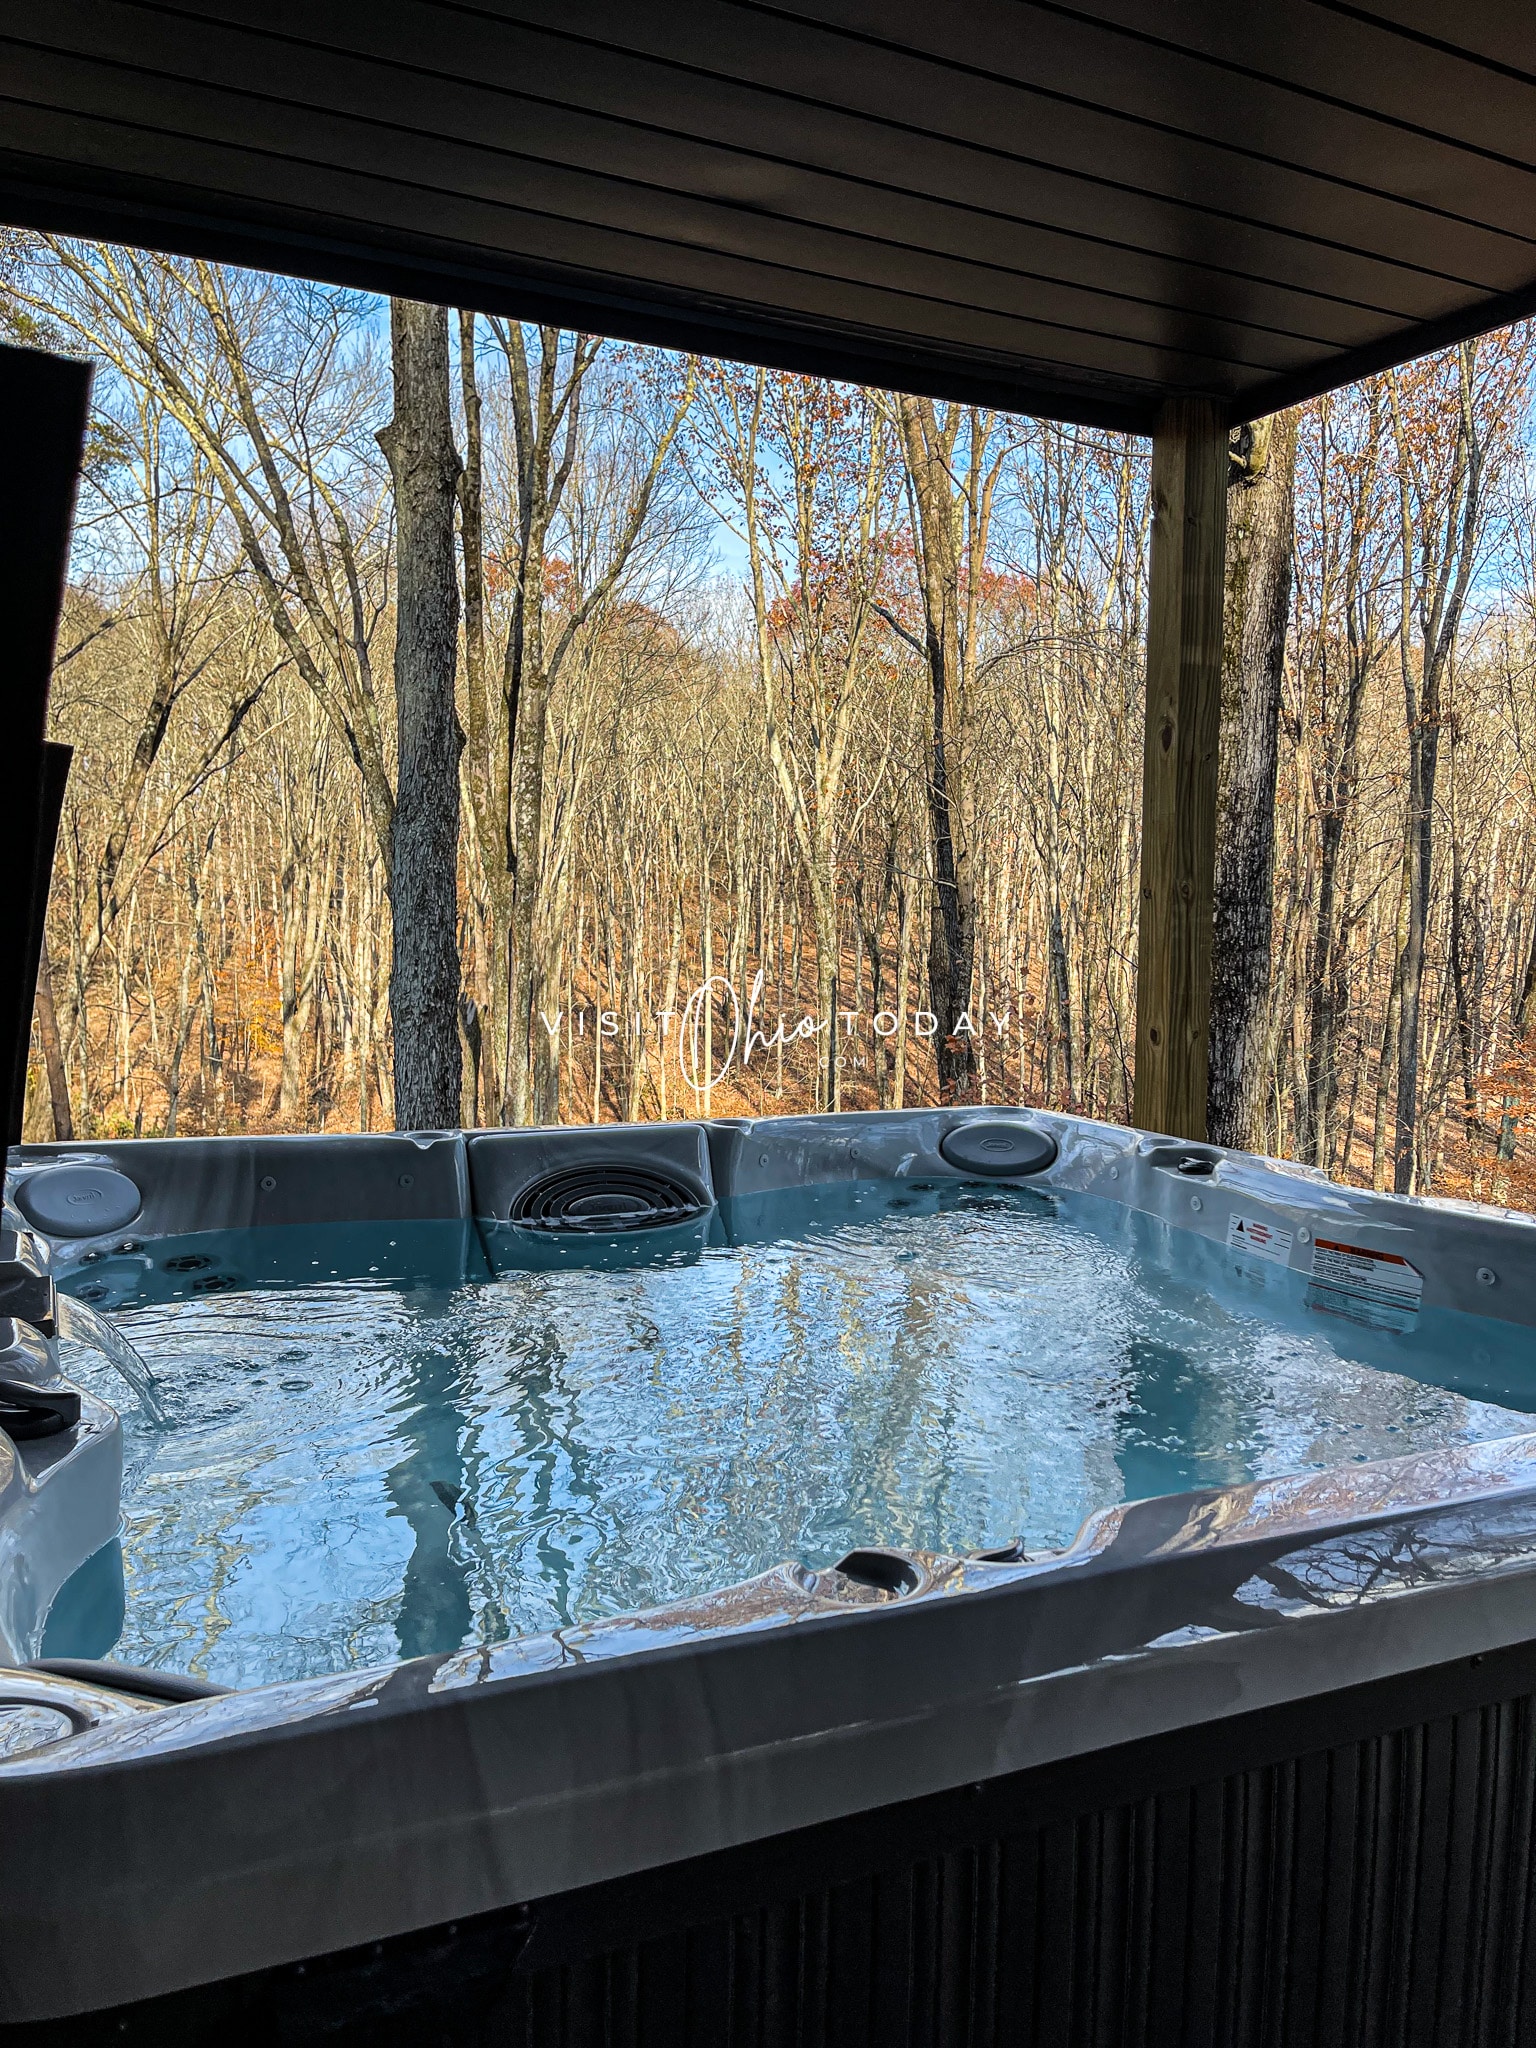 hot tub that is open and filled with water, looking out to the forest, trees don't have many leaves